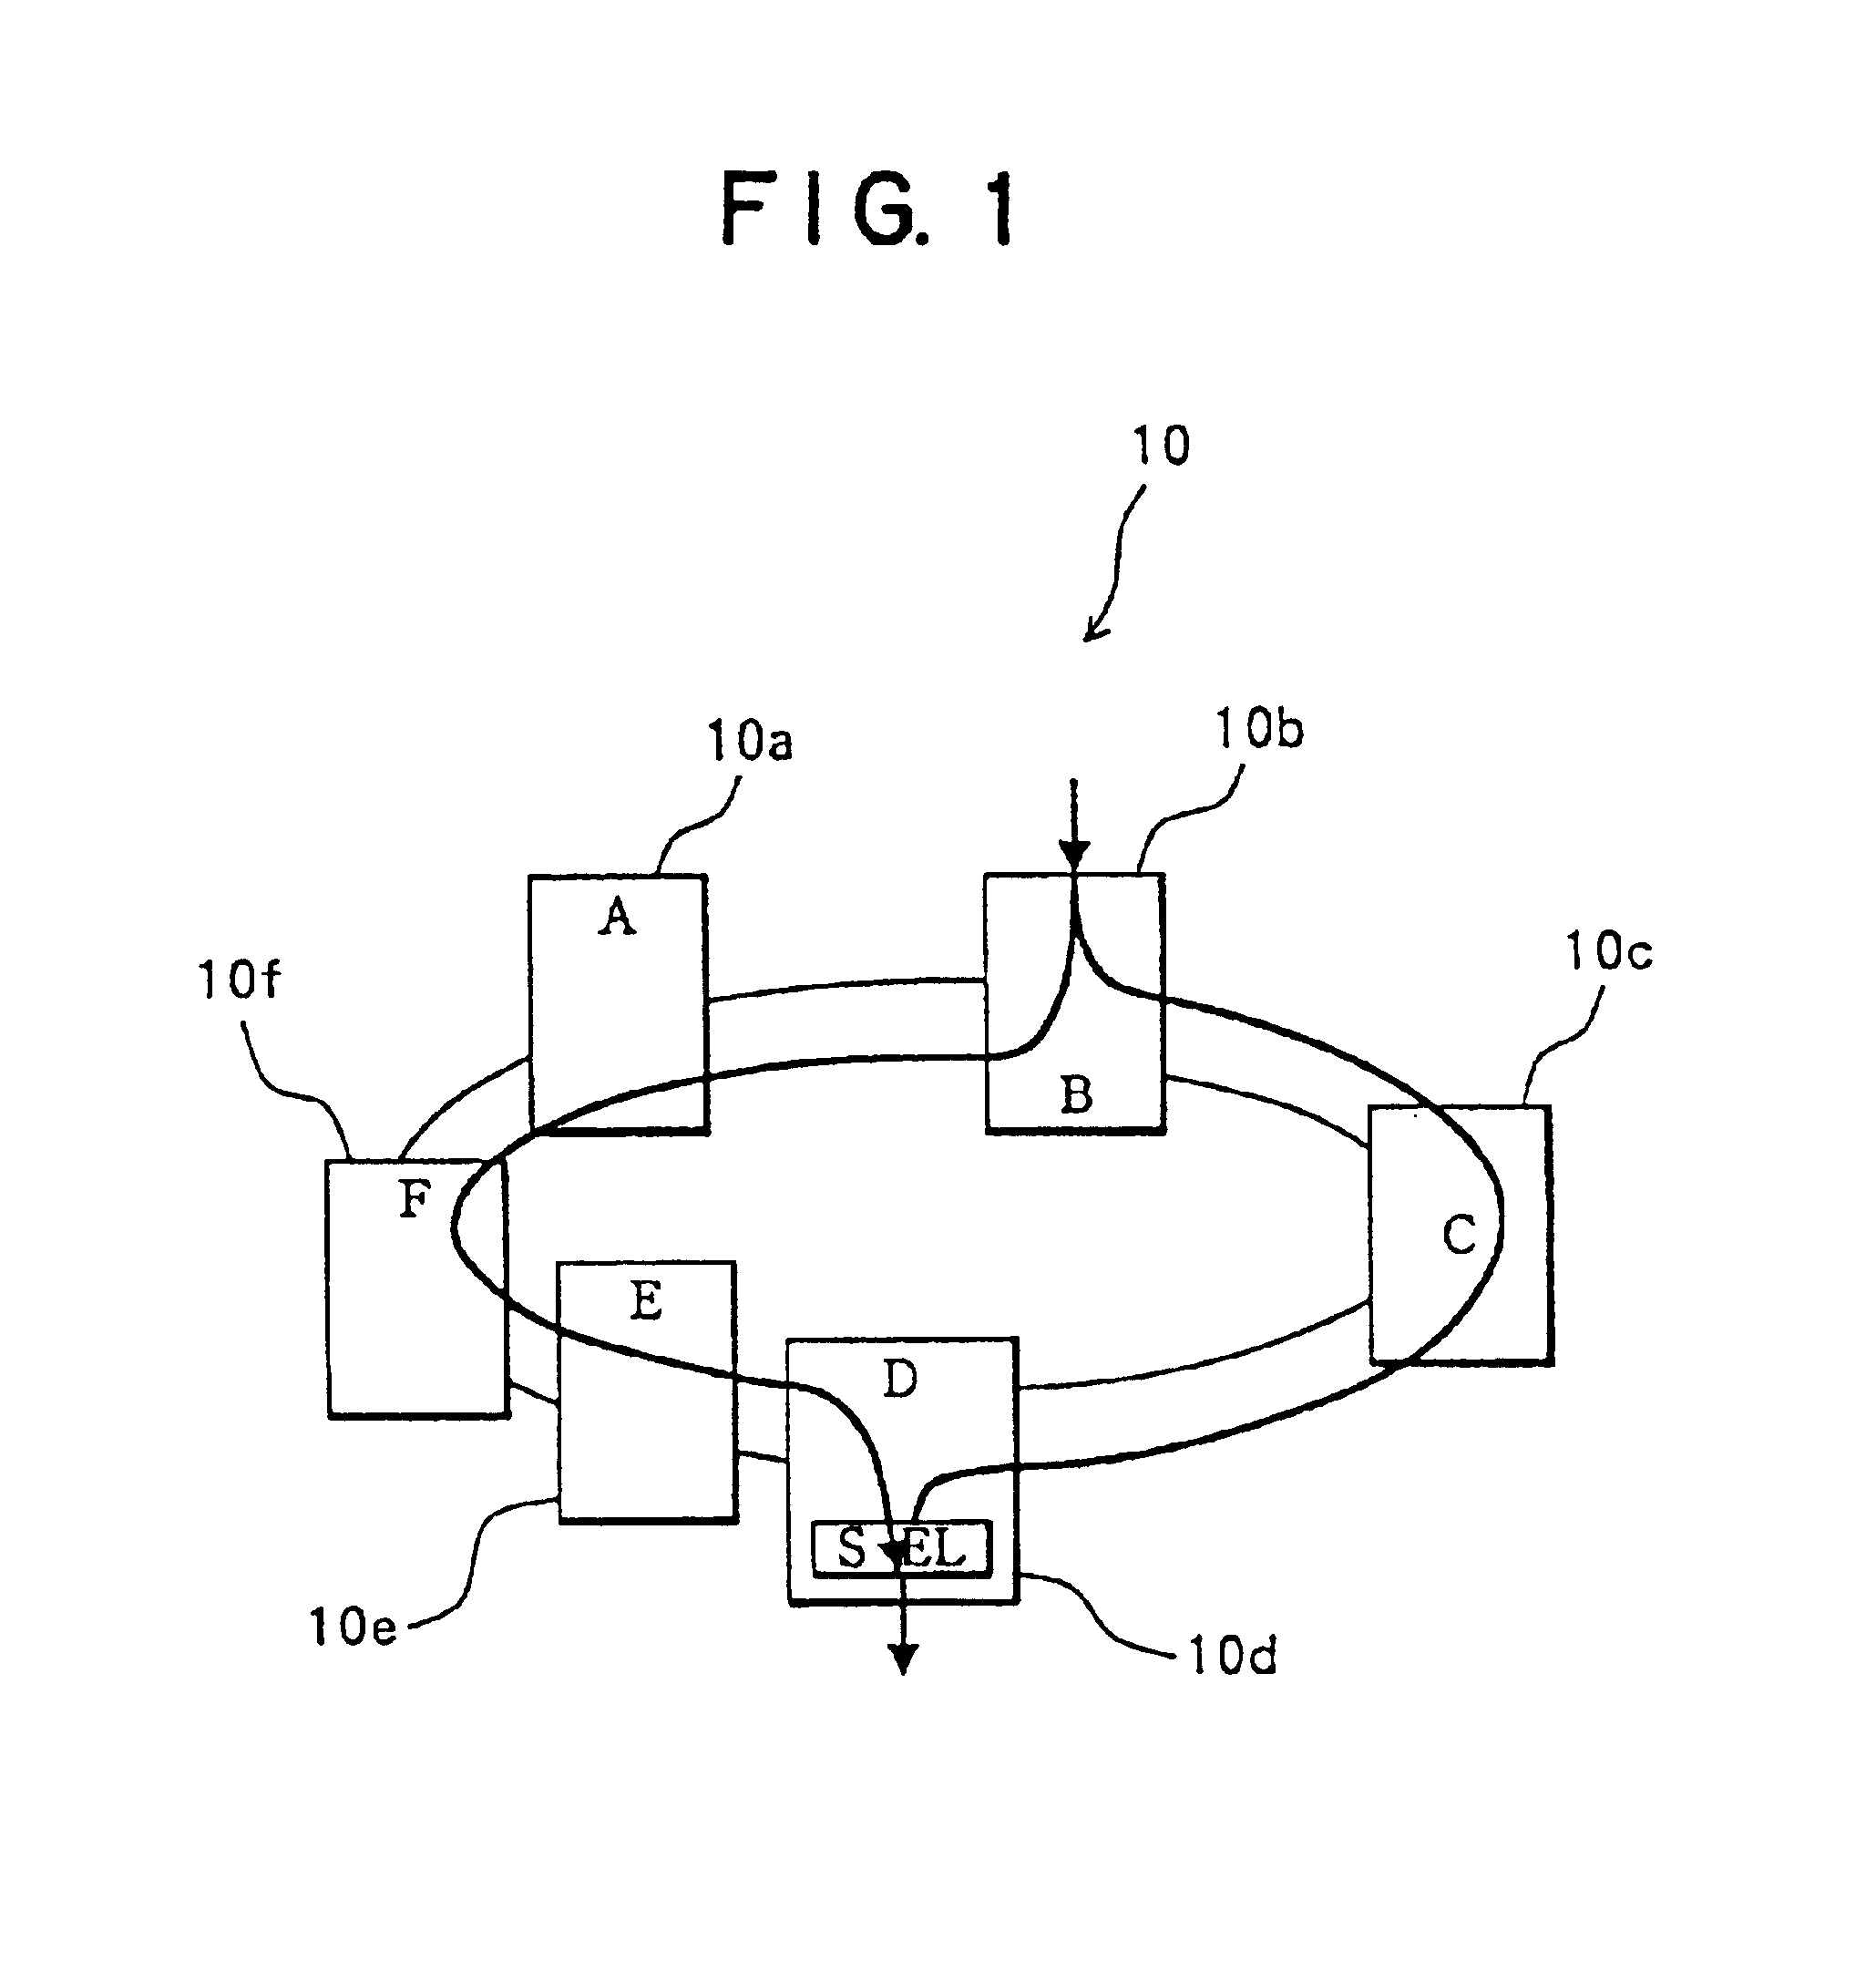 Optical ring transmission system using squelch method